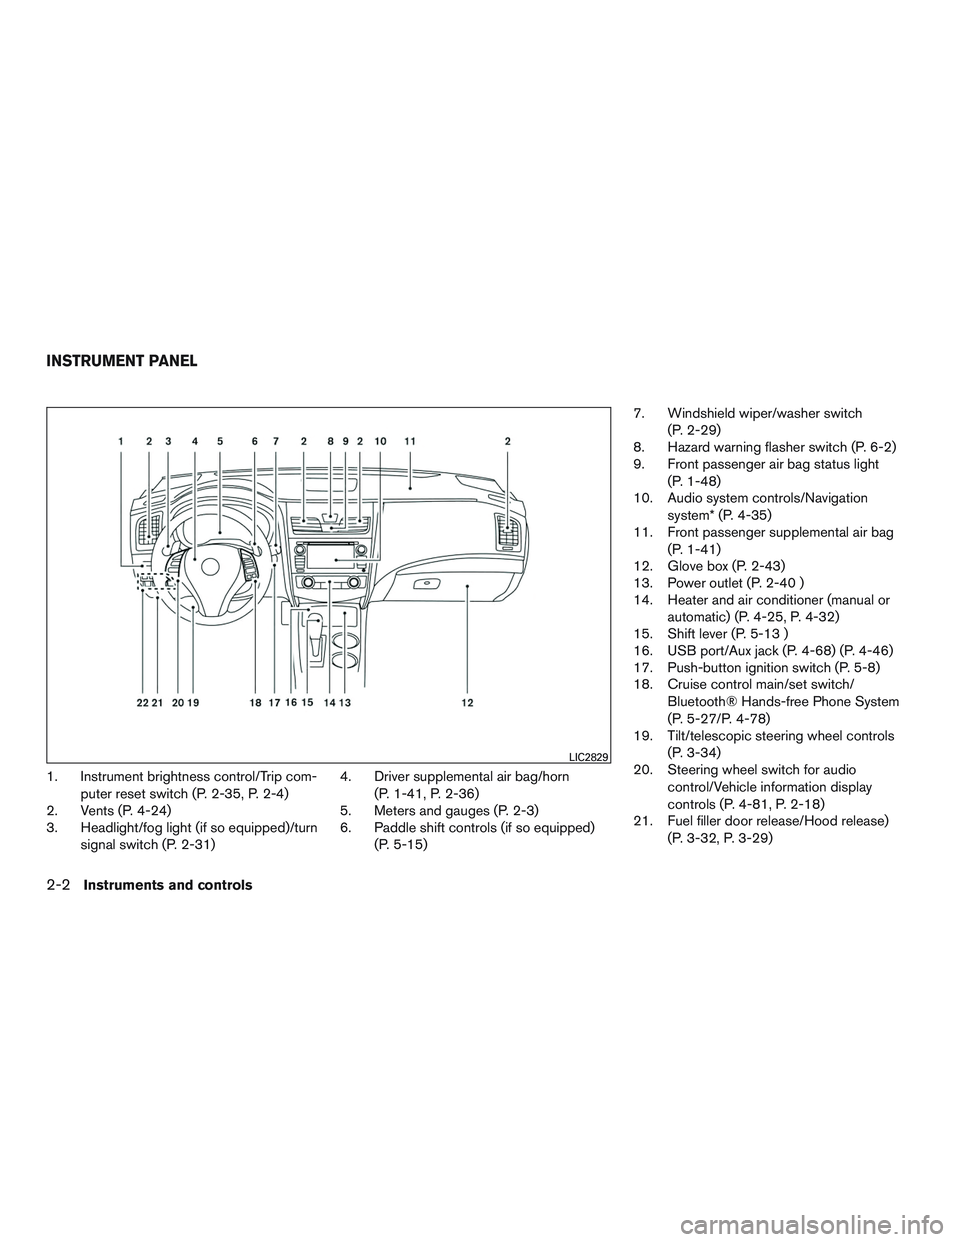 NISSAN ALTIMA SEDAN 2015  Owners Manual 1. Instrument brightness control/Trip com-puter reset switch (P. 2-35, P. 2-4)
2. Vents (P. 4-24)
3. Headlight/fog light (if so equipped)/turn
signal switch (P. 2-31) 4. Driver supplemental air bag/ho